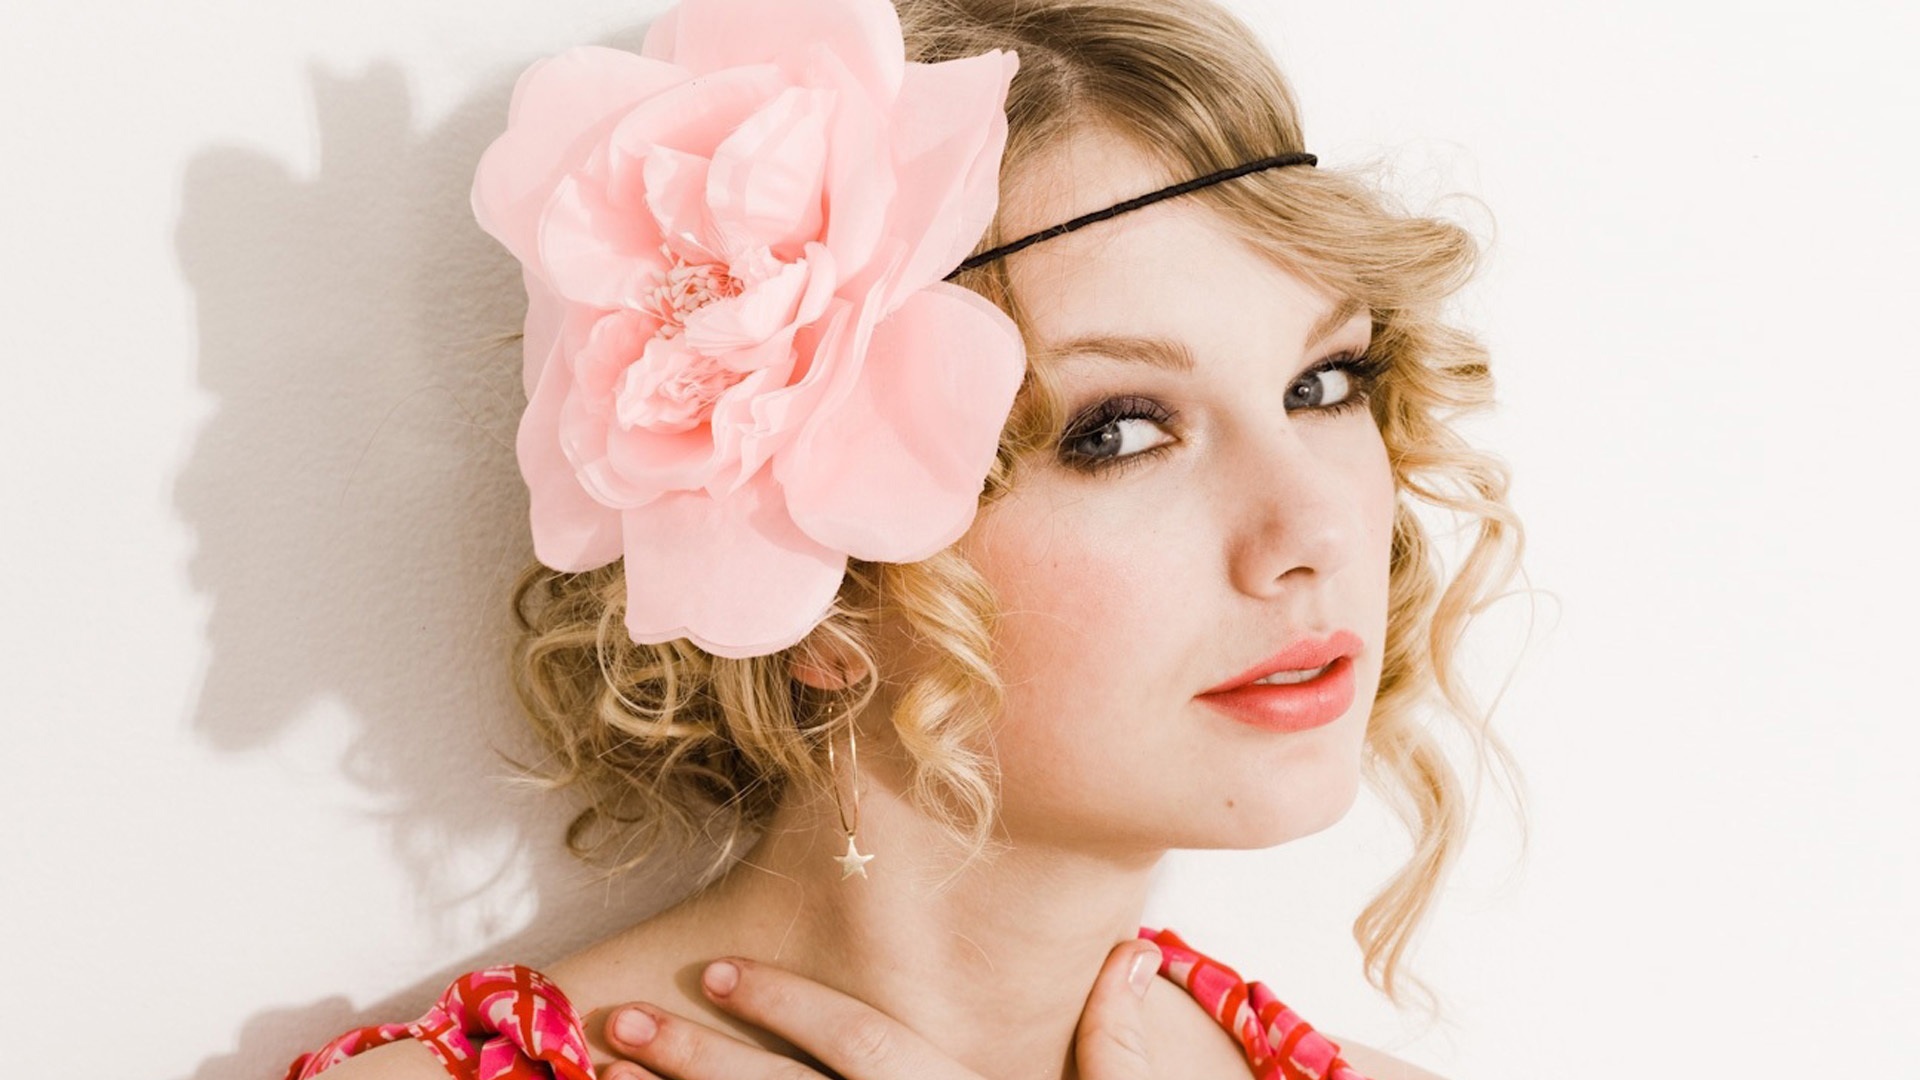 taylor swift wallpapers hd A6